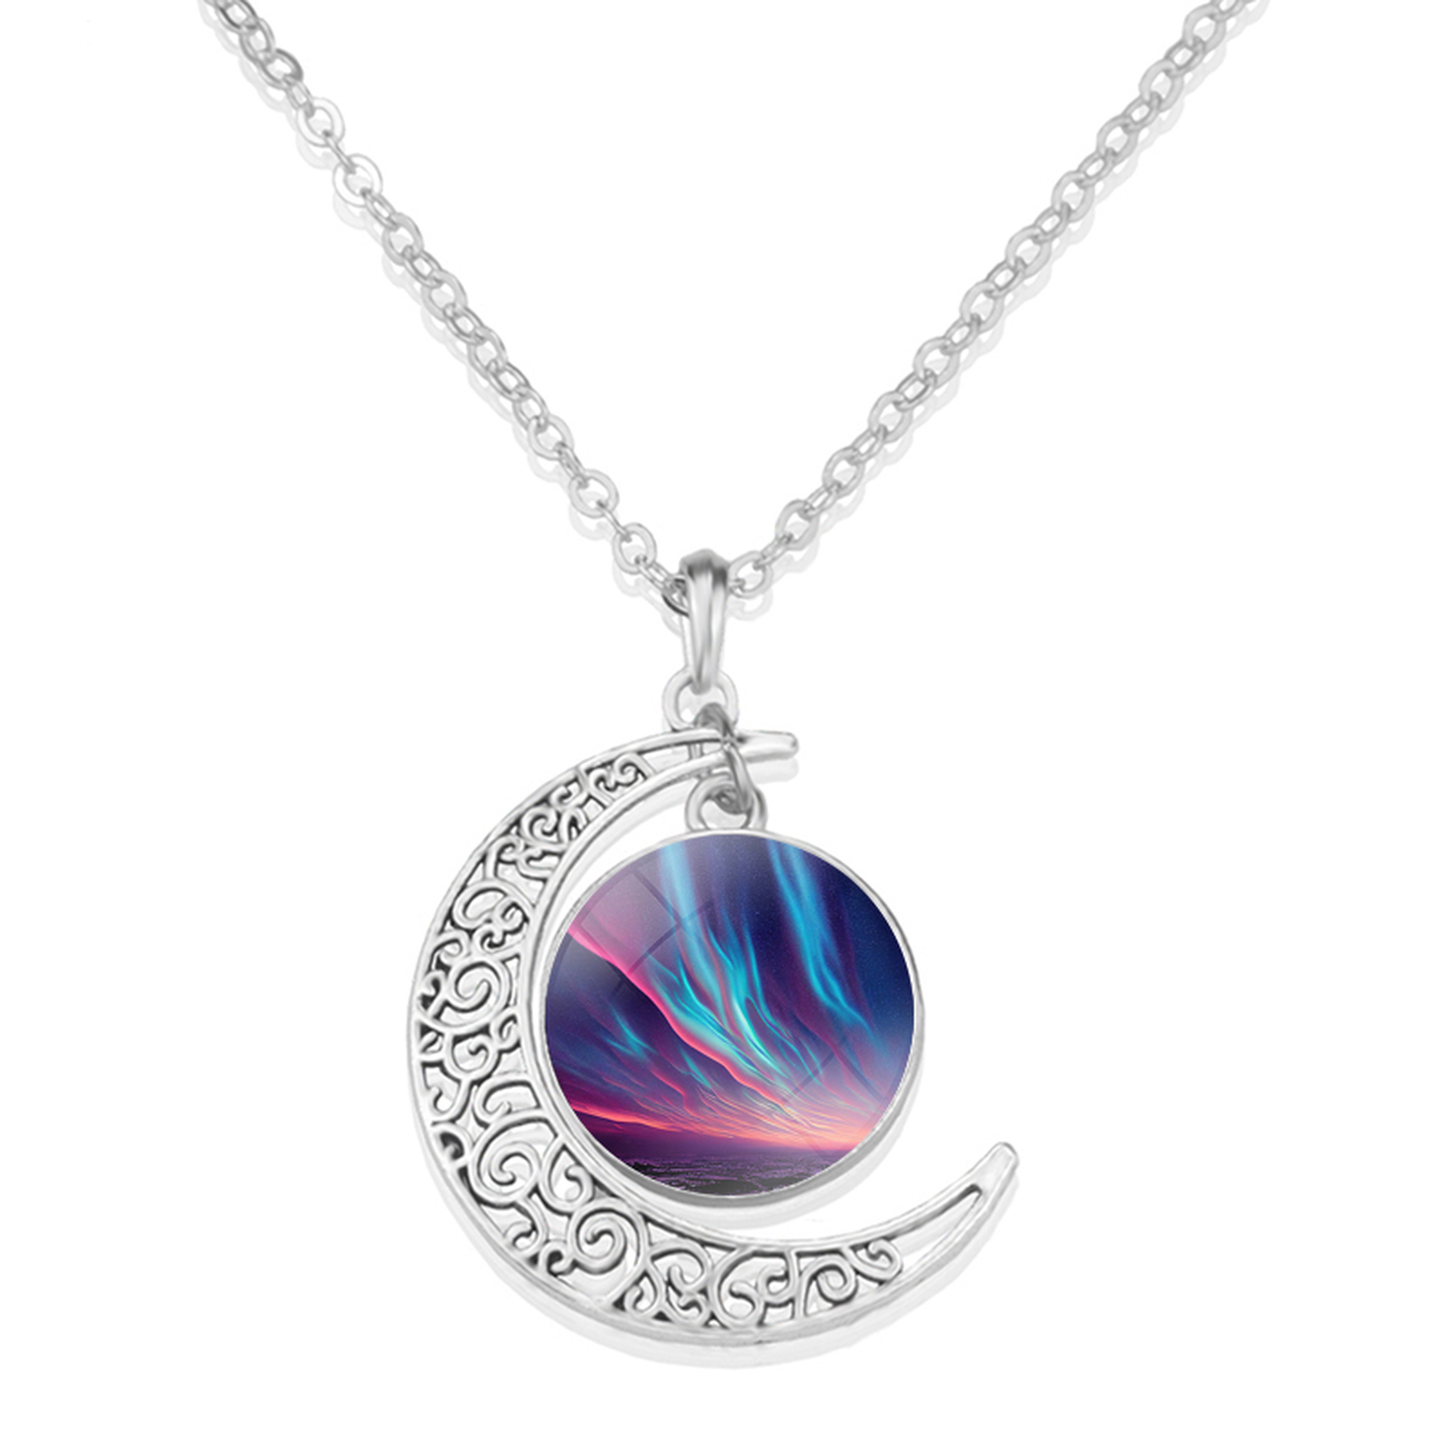 Unique Aurora Borealis Crescent Necklace - Northern Light Jewelry - Crescent Glass Cabochon Pendent Necklace - Perfect Aurora Lovers Gift 4